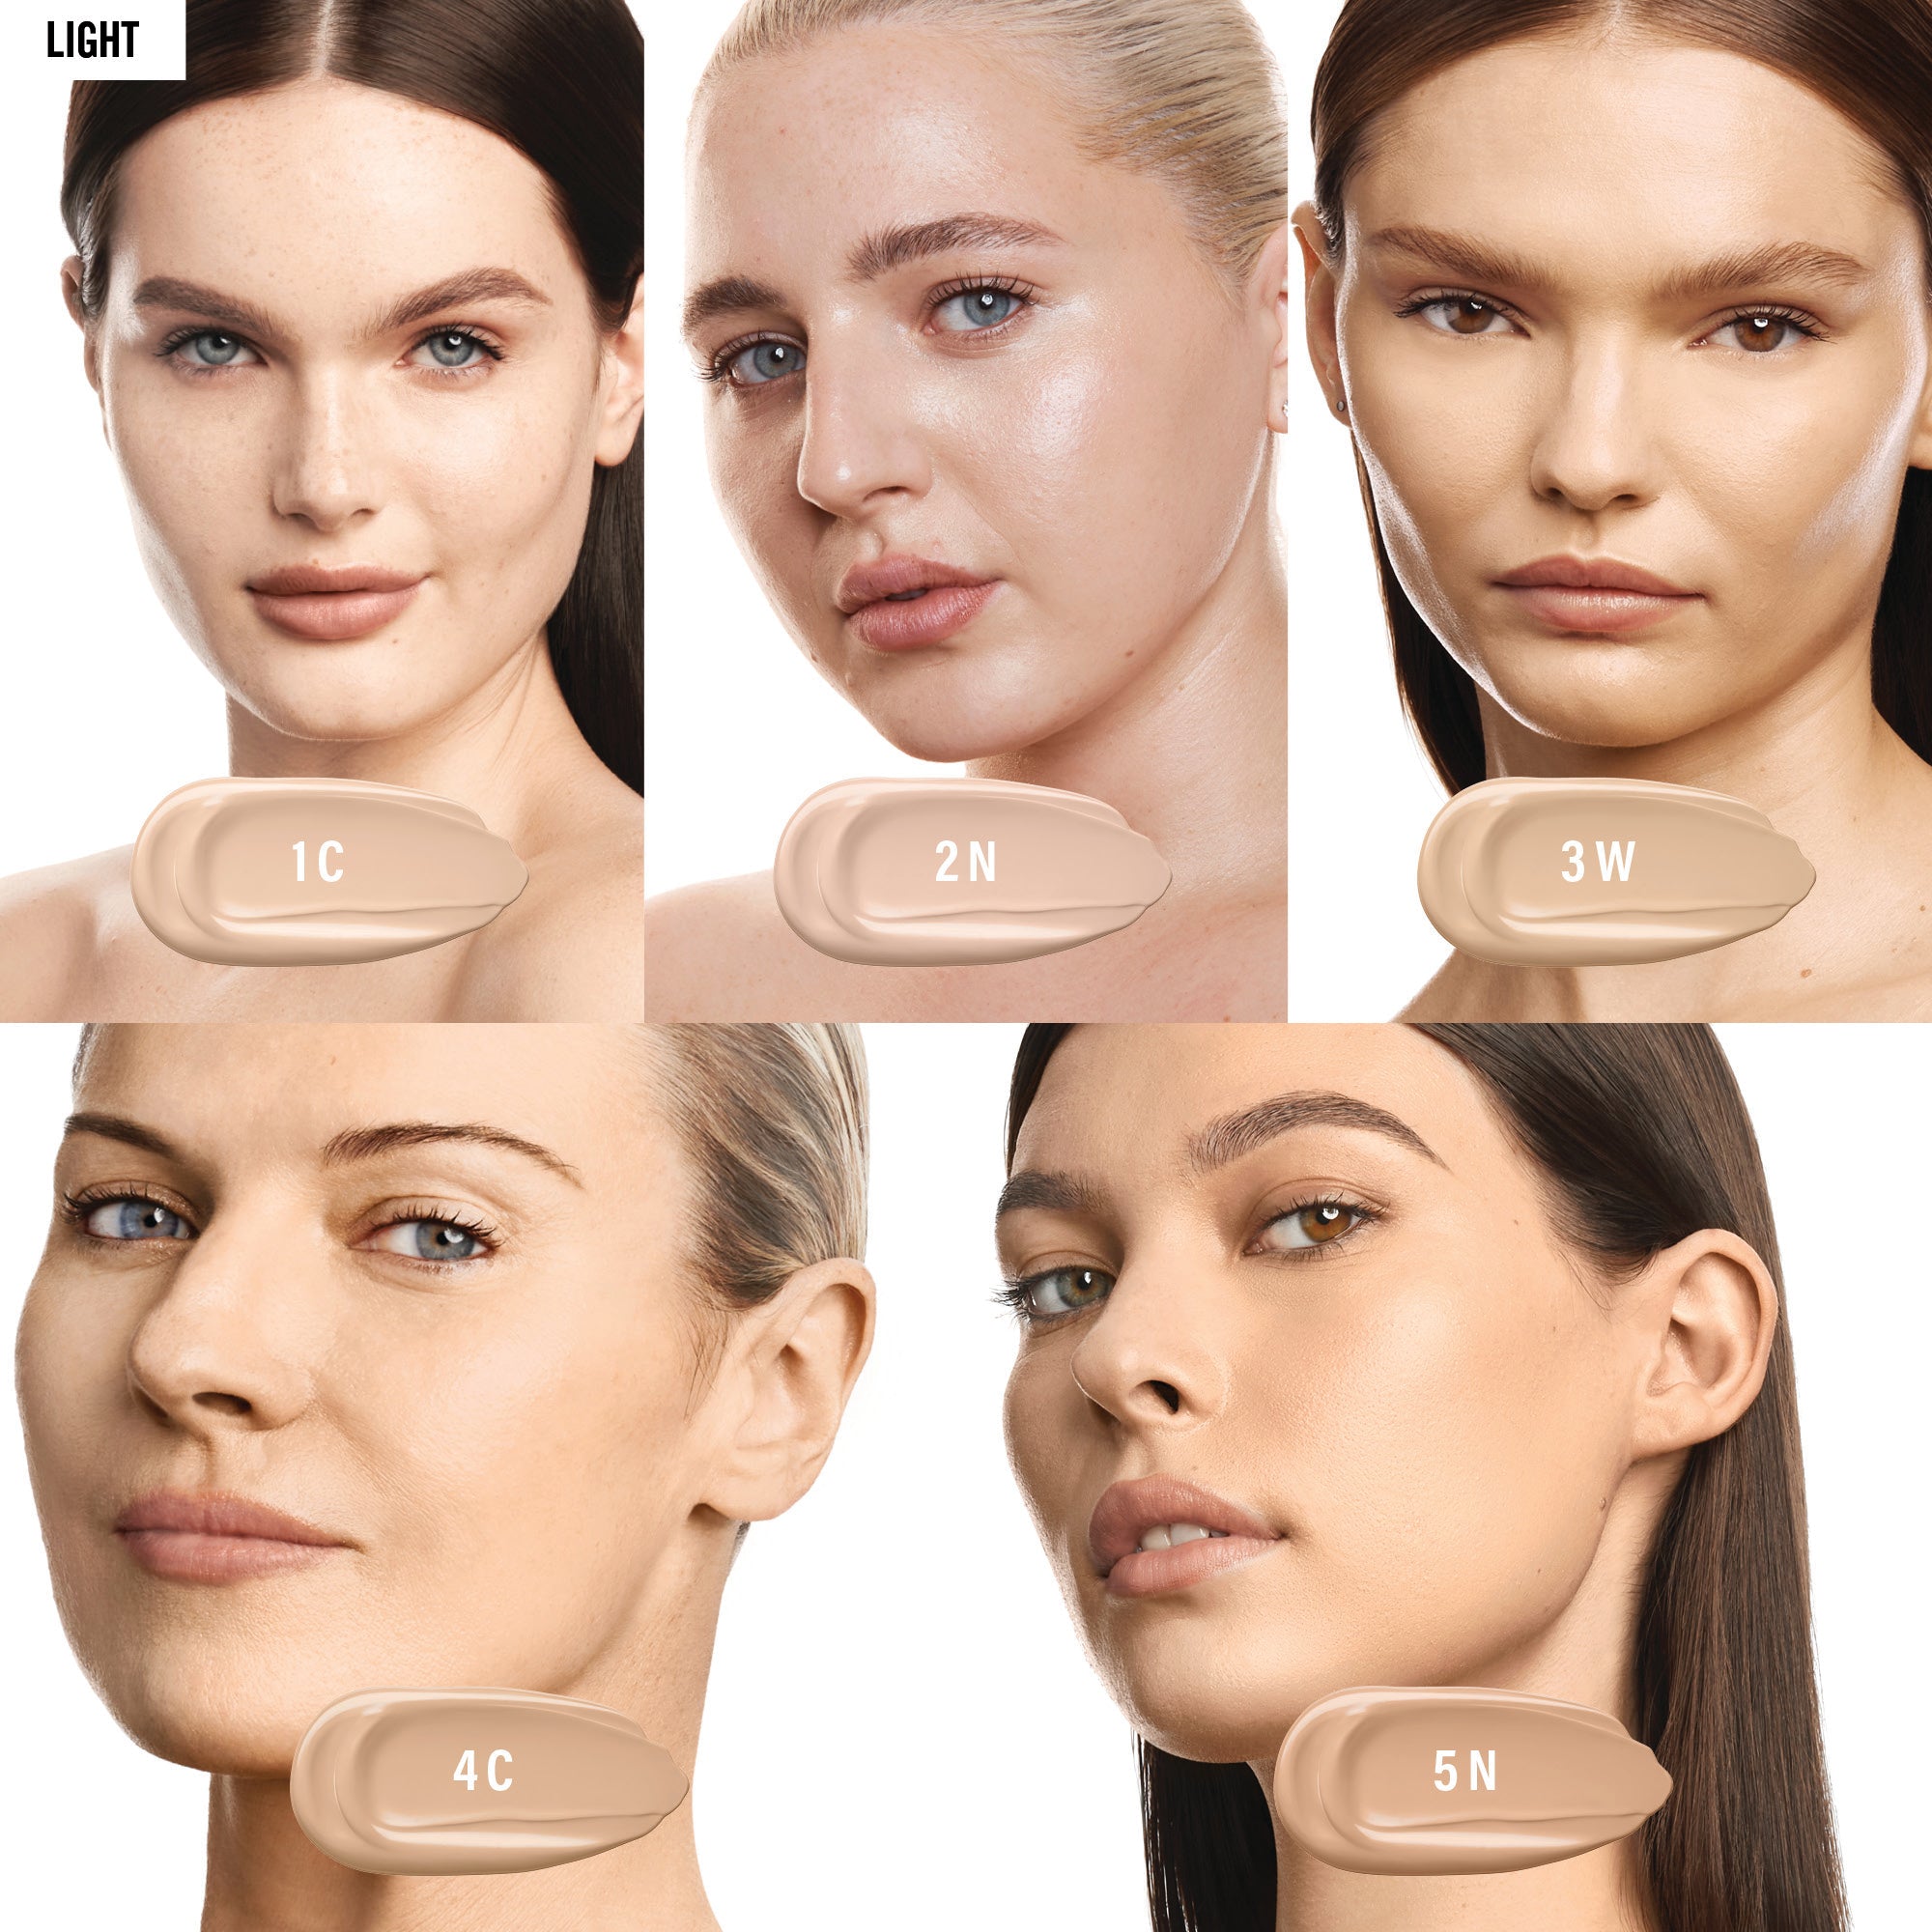 Foundation for the Face & Complexion - Makeup